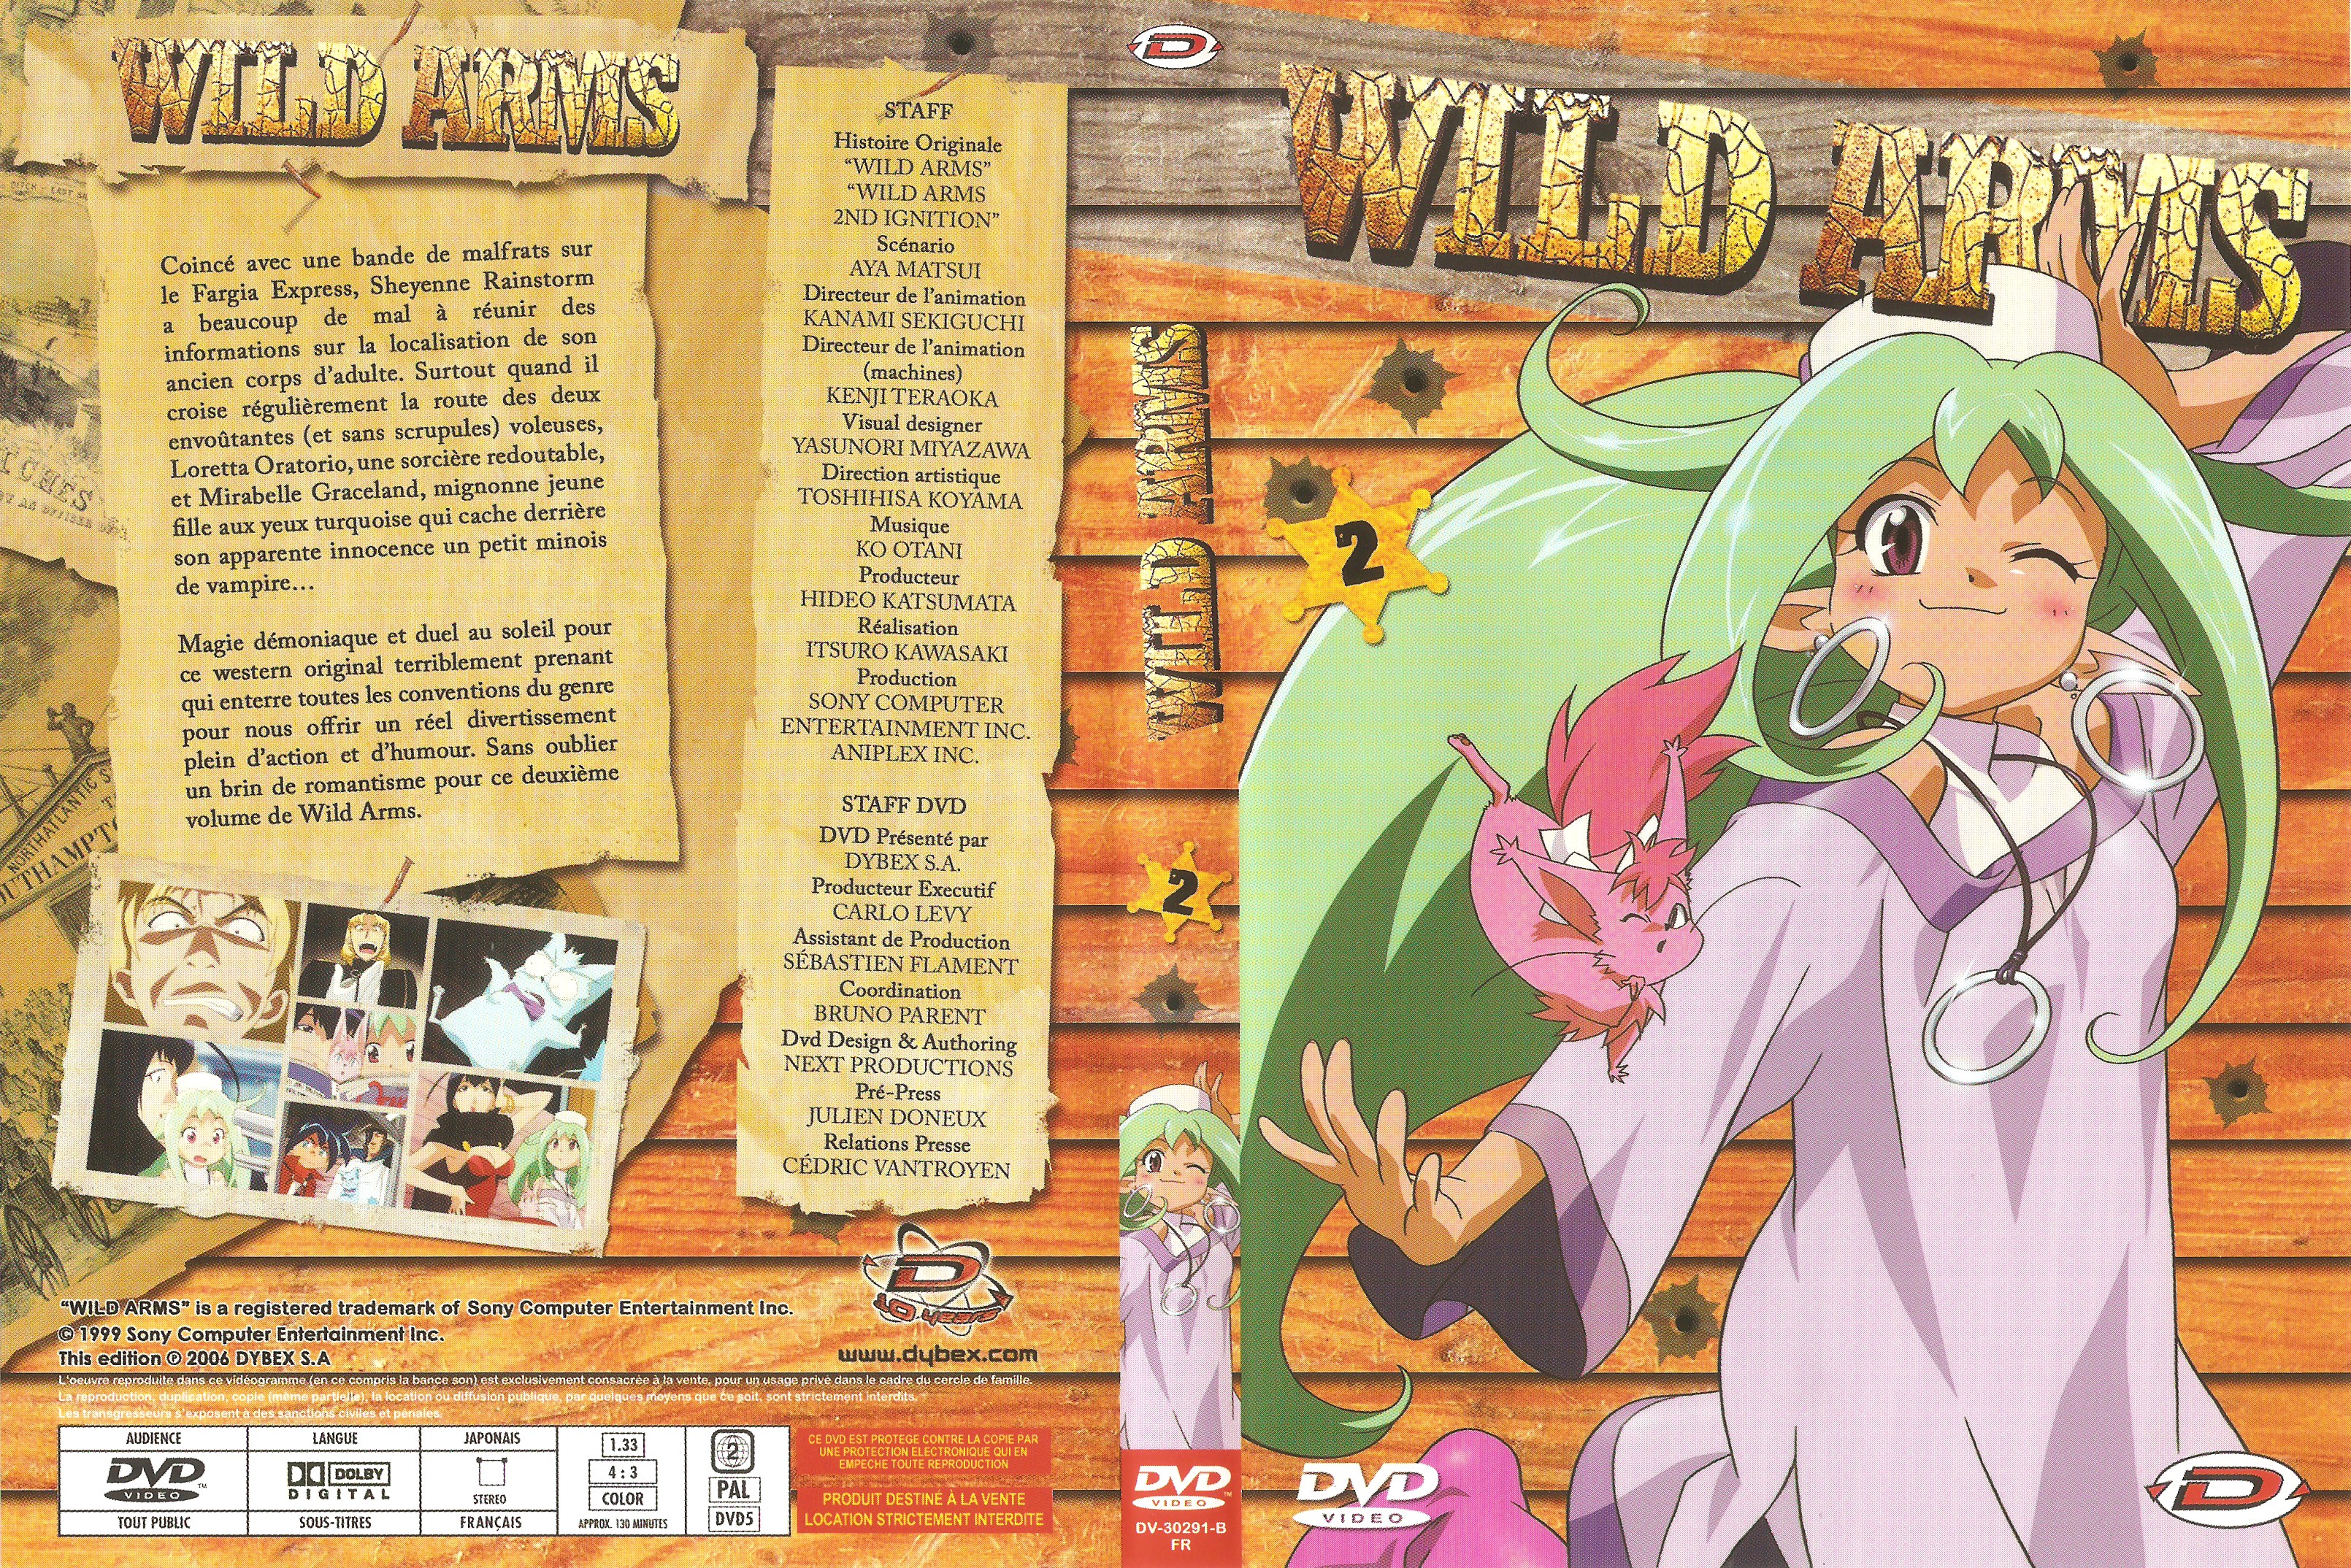 Jaquette DVD Wild Arms vol 2